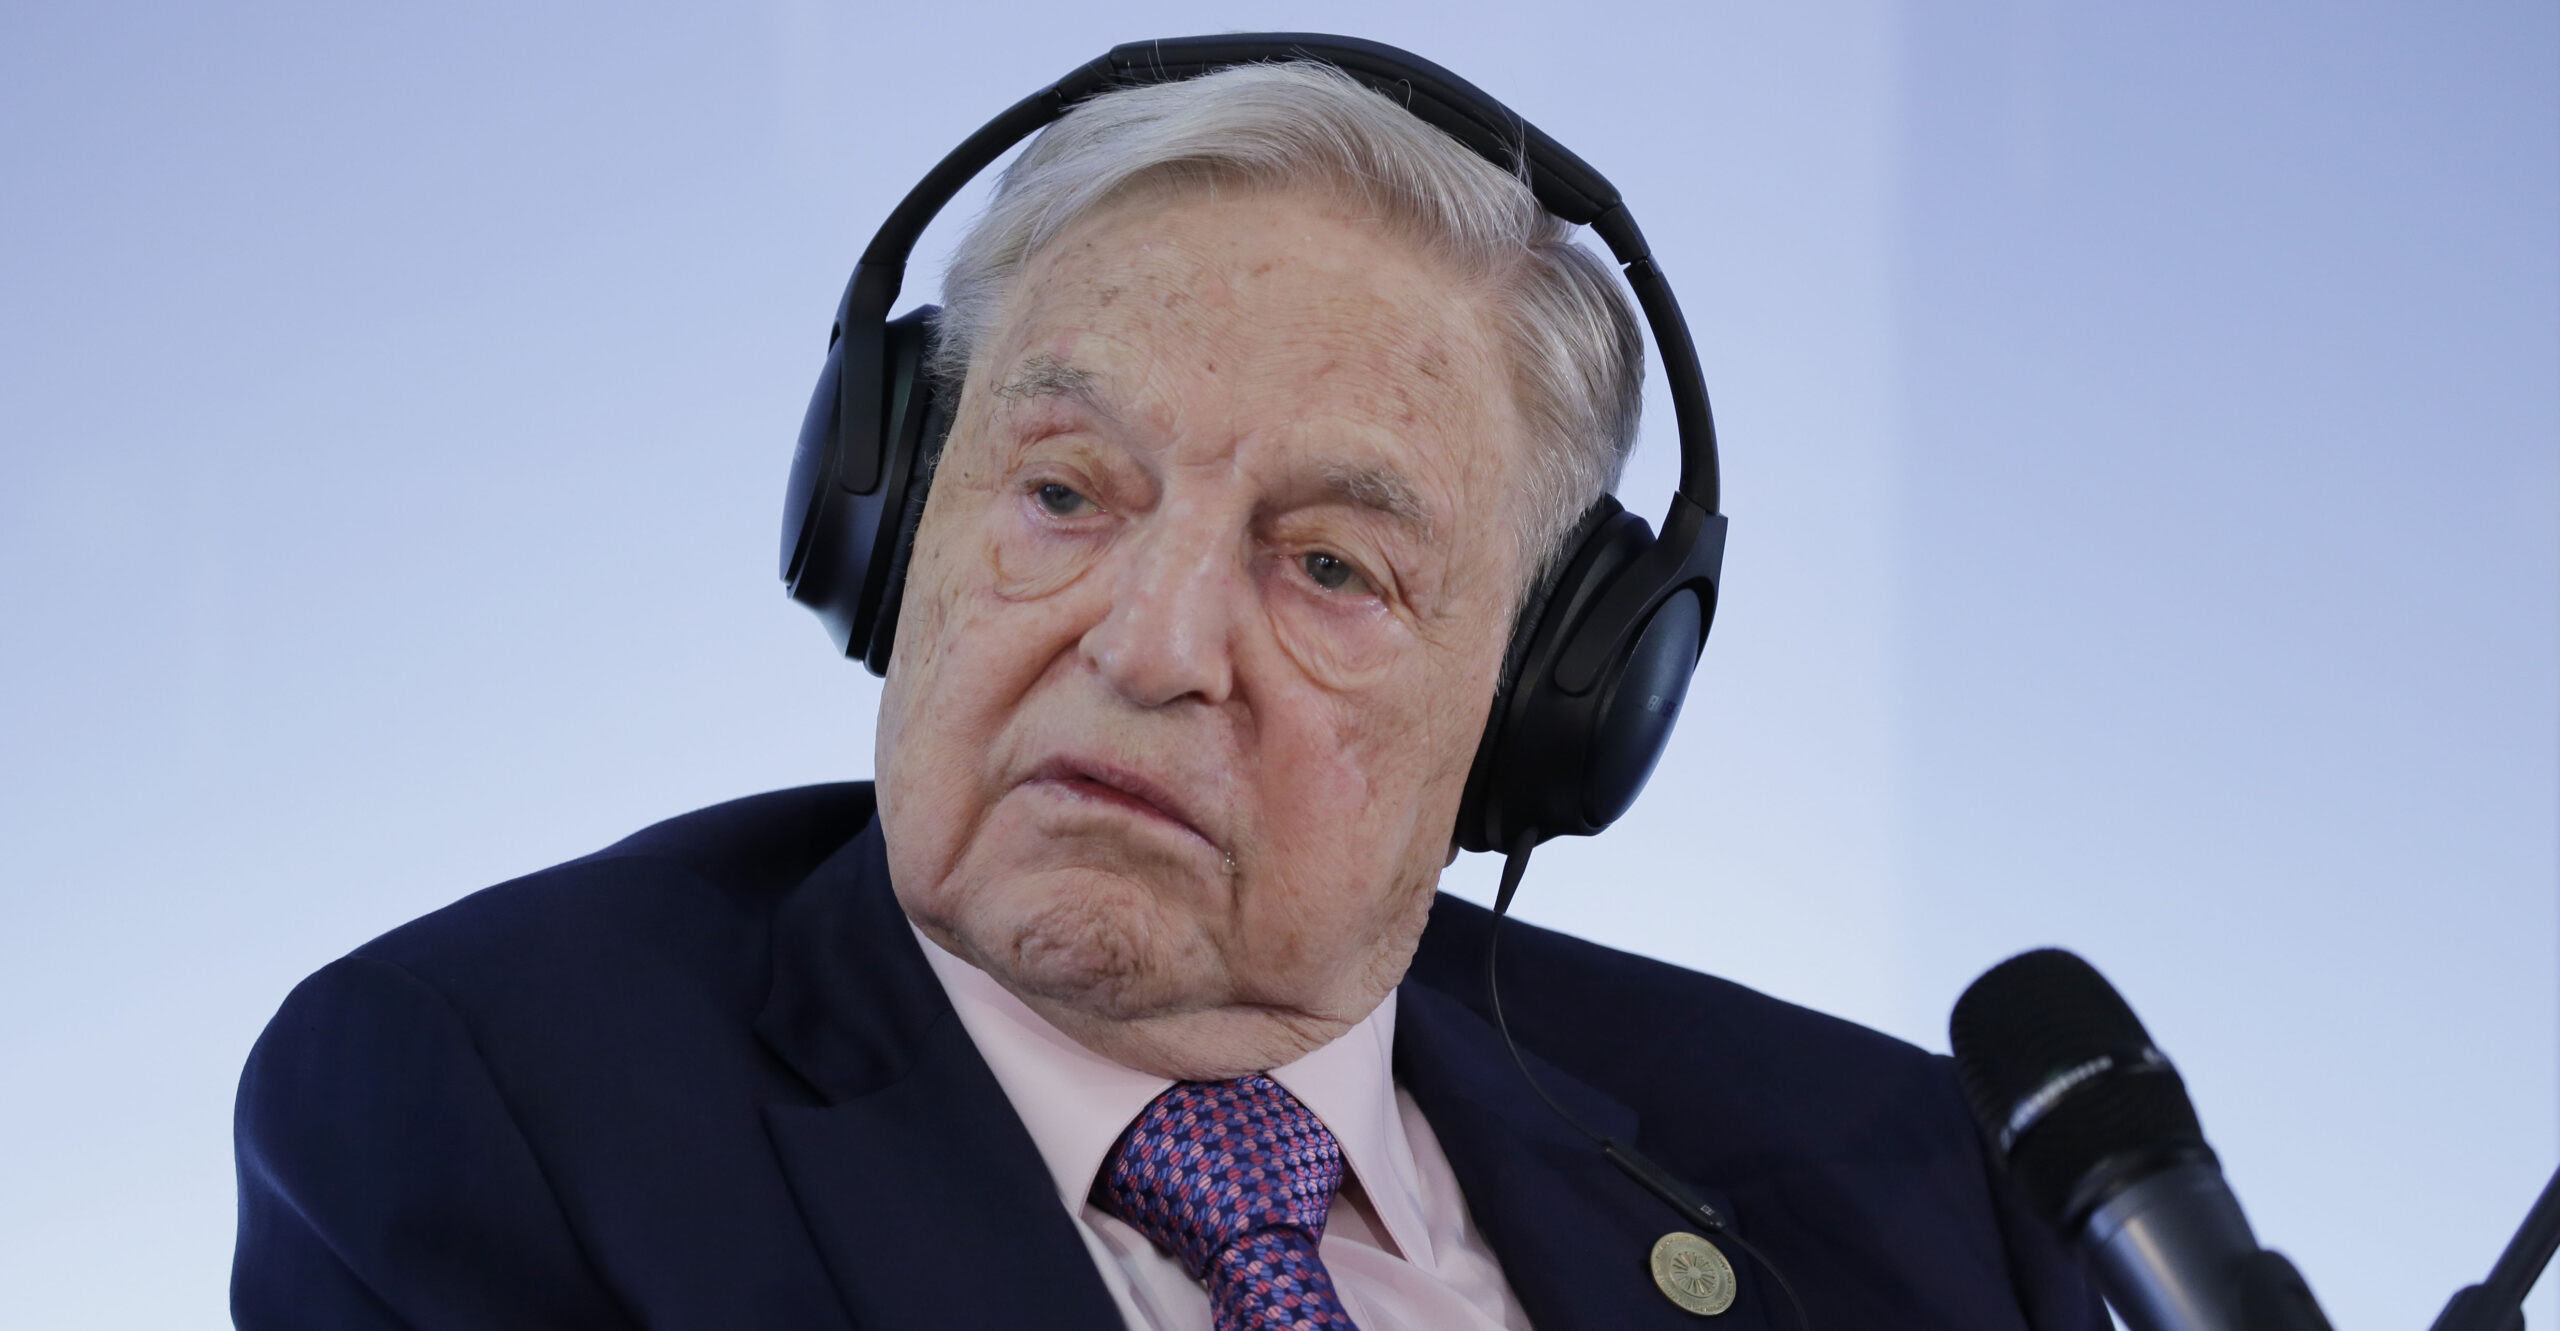 Soros-Funded Prosecutors Put ‘Social Justice’ Above Law and Order, Analysts Say